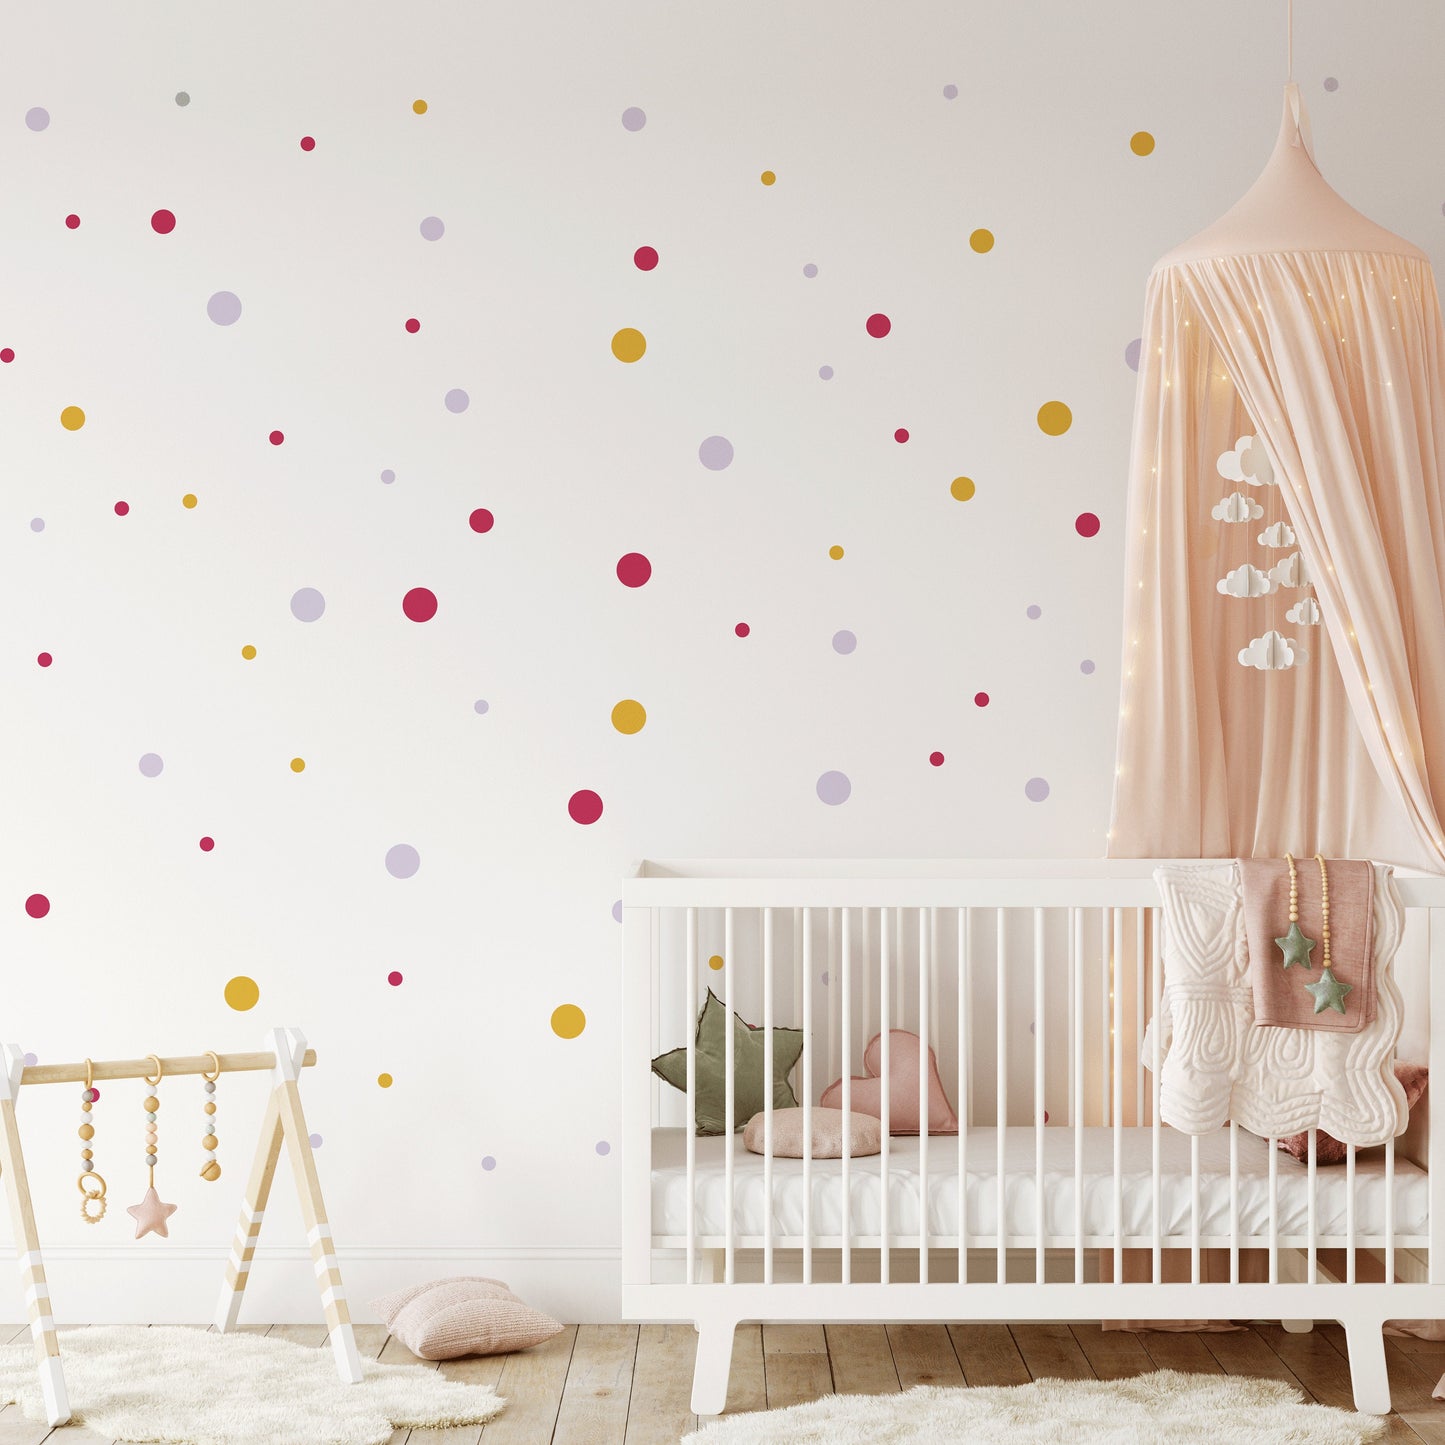 Mustard Pink Shades Polka Dot Wall Stickers For Kids Rooms Nursery Wall Decor For Girls Bedroom Peel & Stick Decals Home DIY